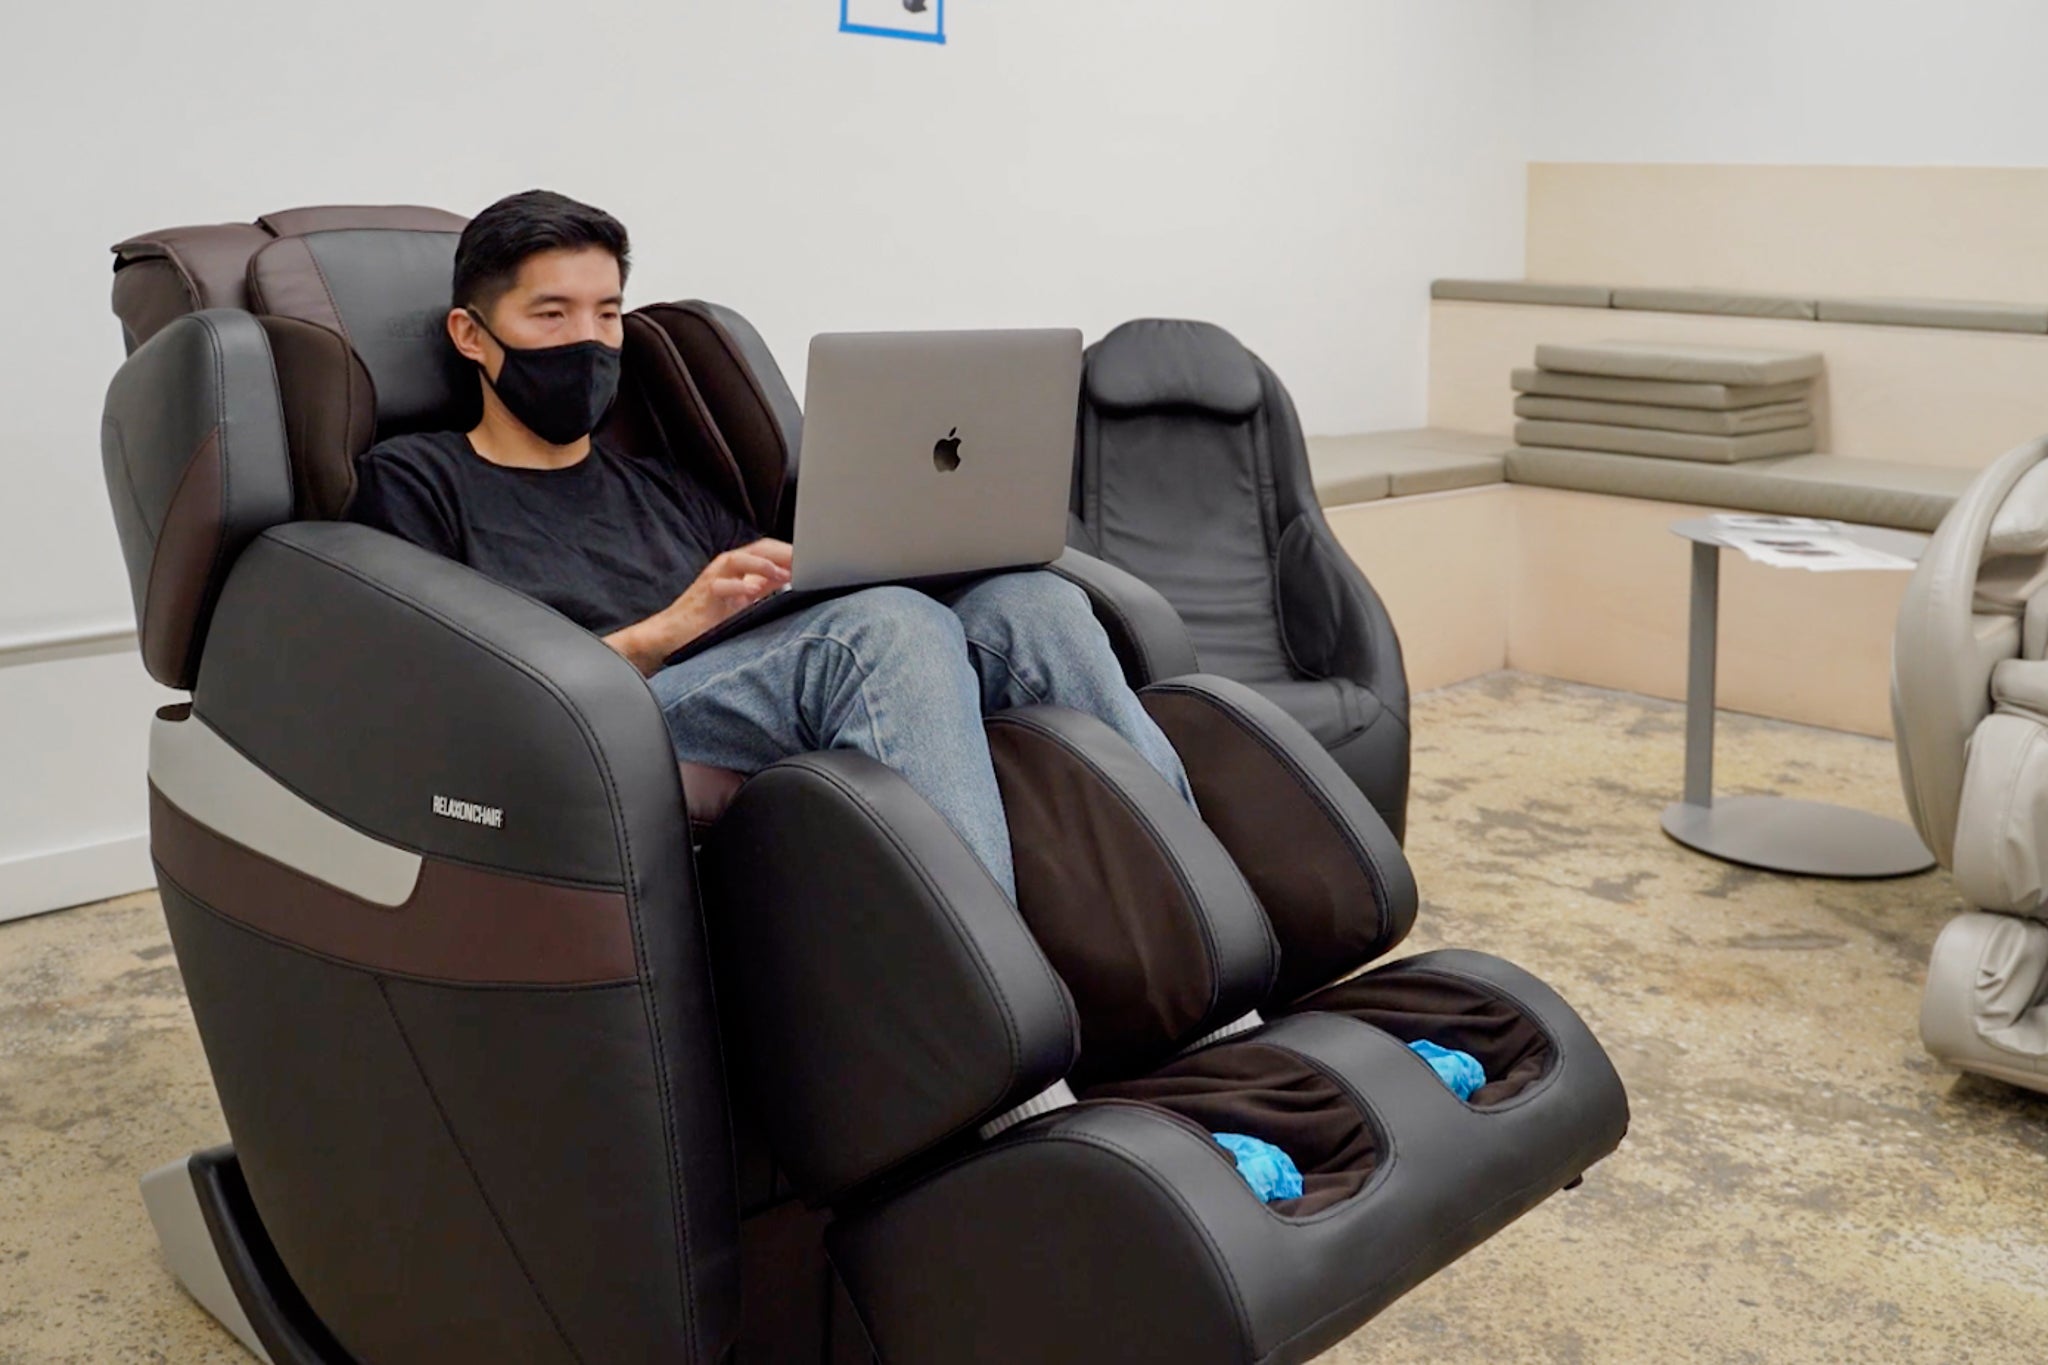 Level Up Your Comfort at Home with Massage Chairs from Masseuse